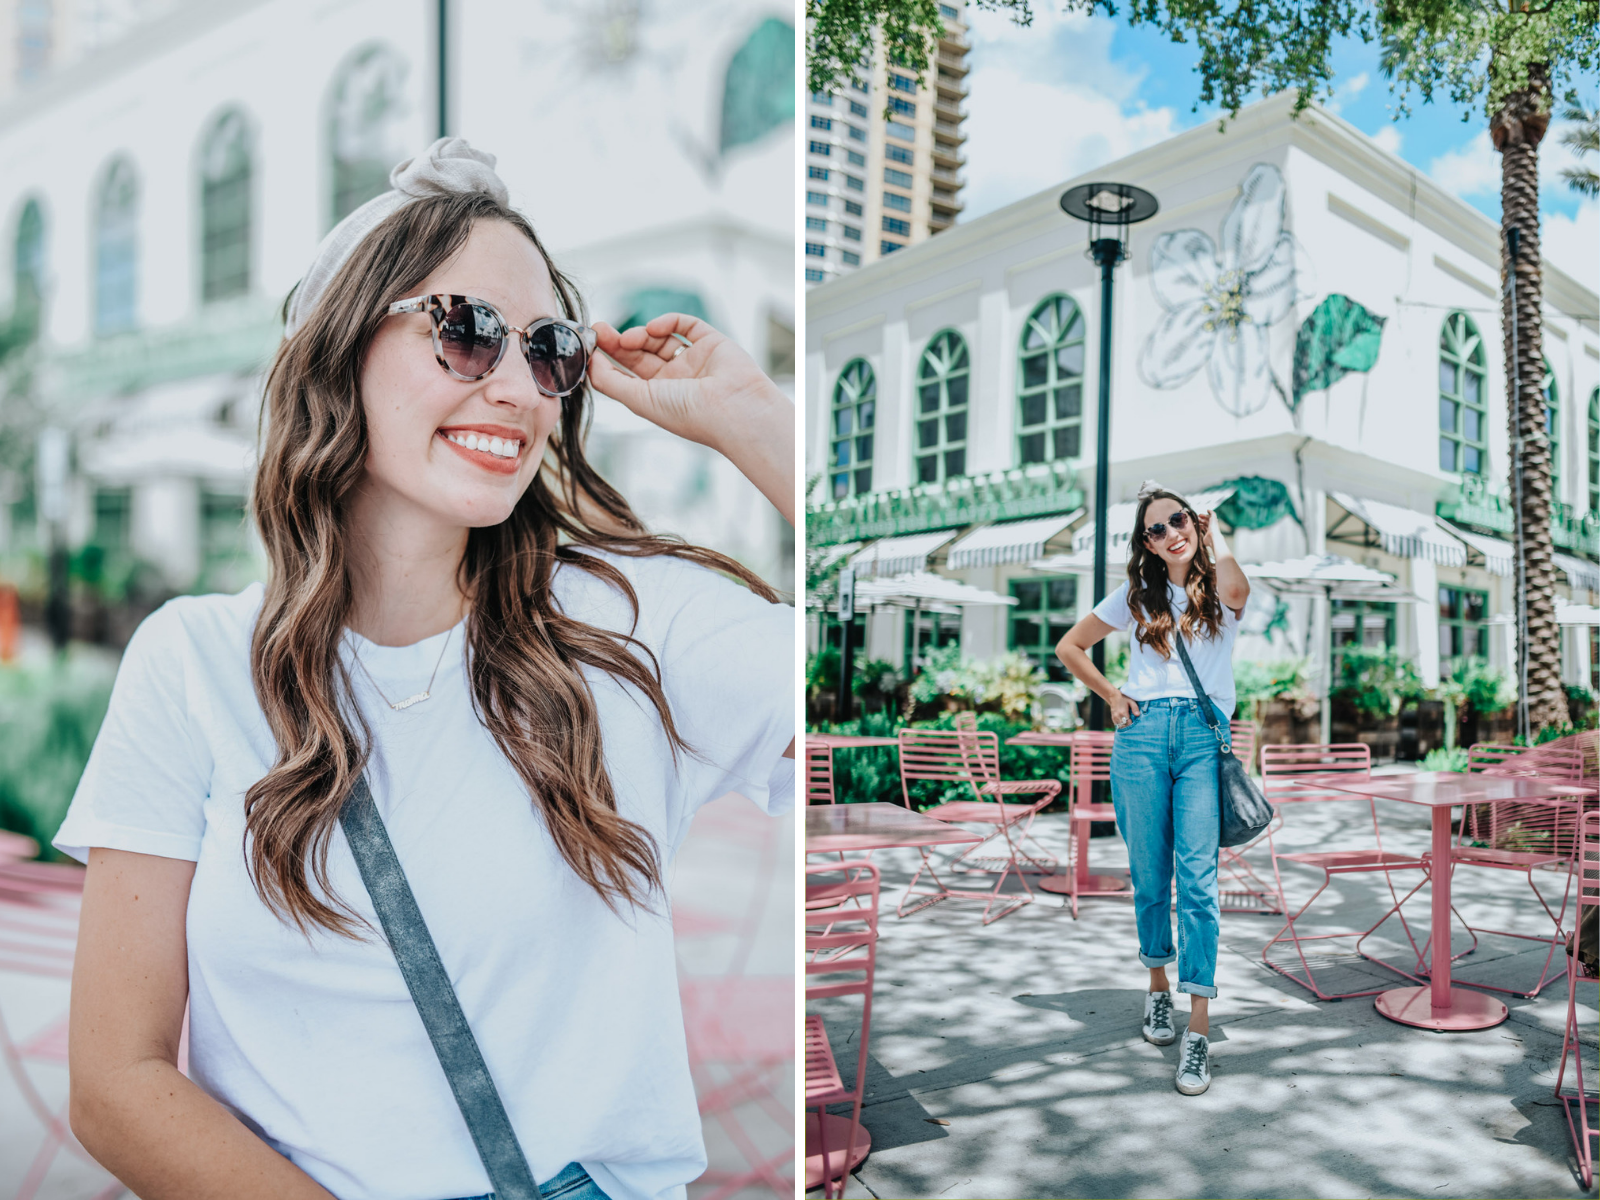 Basic Wardrobe Essentials for every mom featured by top US fashion blog, Lone Star Looking Glass: image of a woman wearing Everlane Straight jeans, Golden Goose sneakers, a knot headband, a crossbody bag and an Everlane white tee.